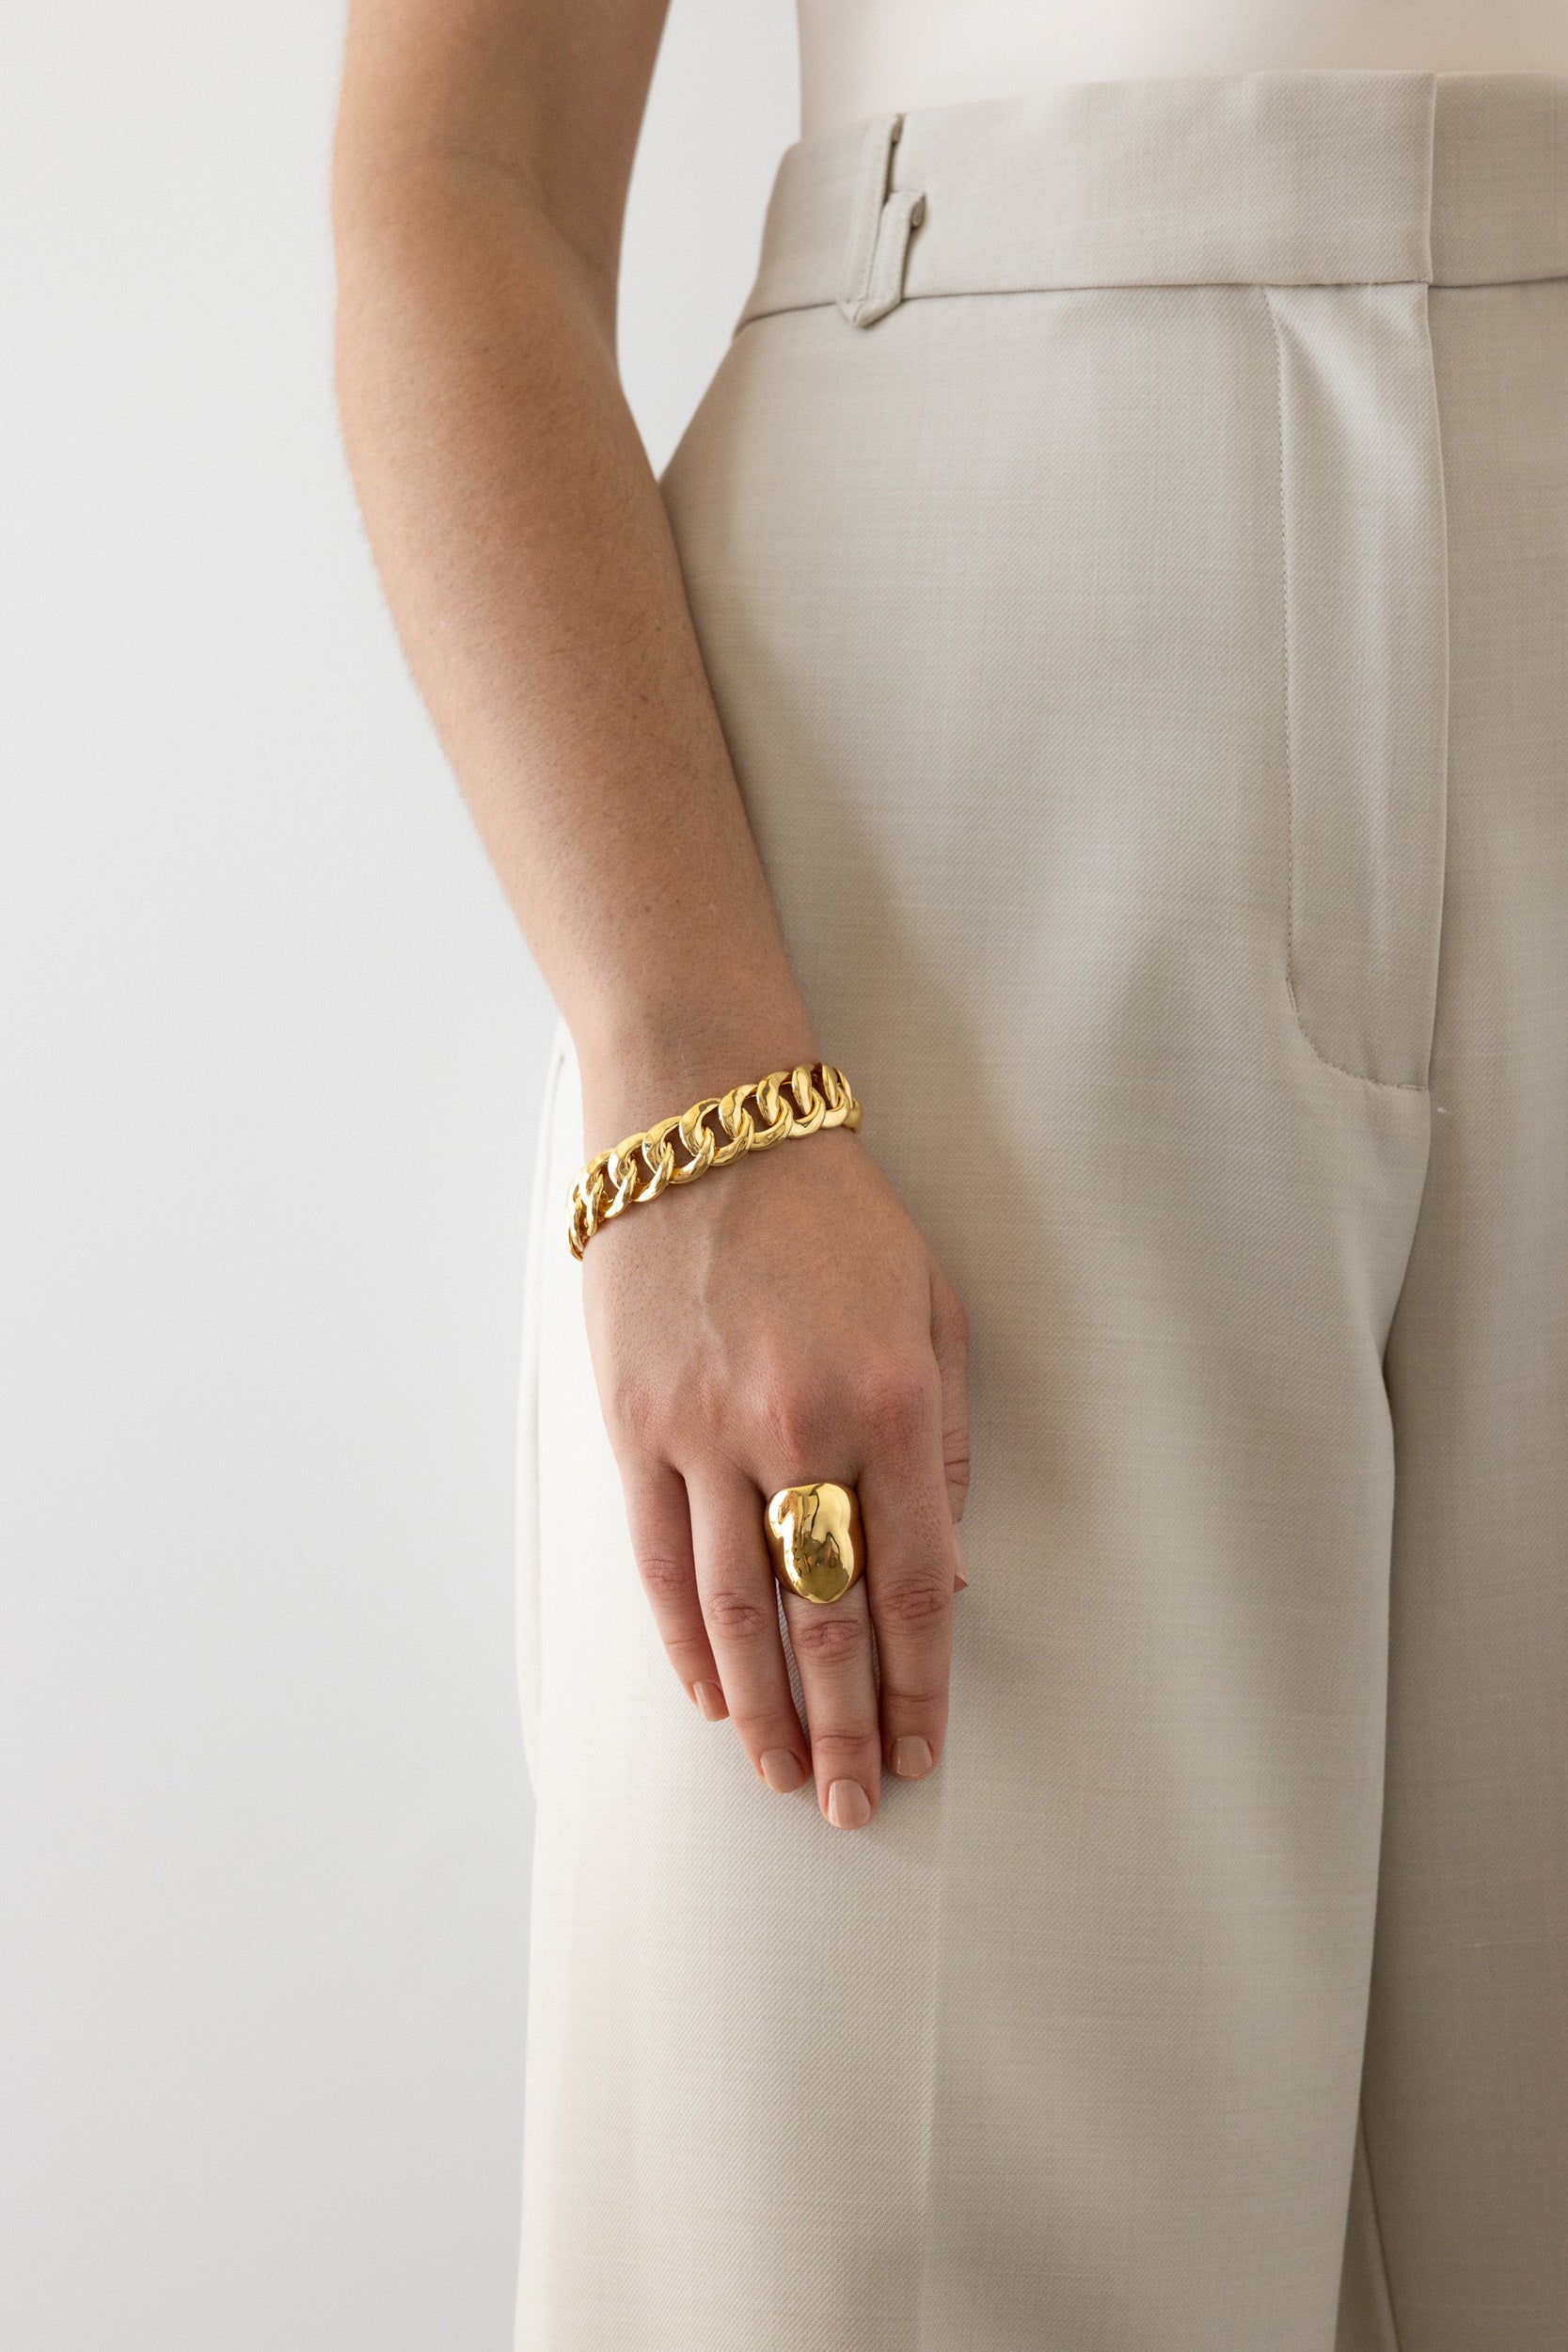 Flash Jewellery Dylan Dome Ring in 14k Gold Vermeil on model